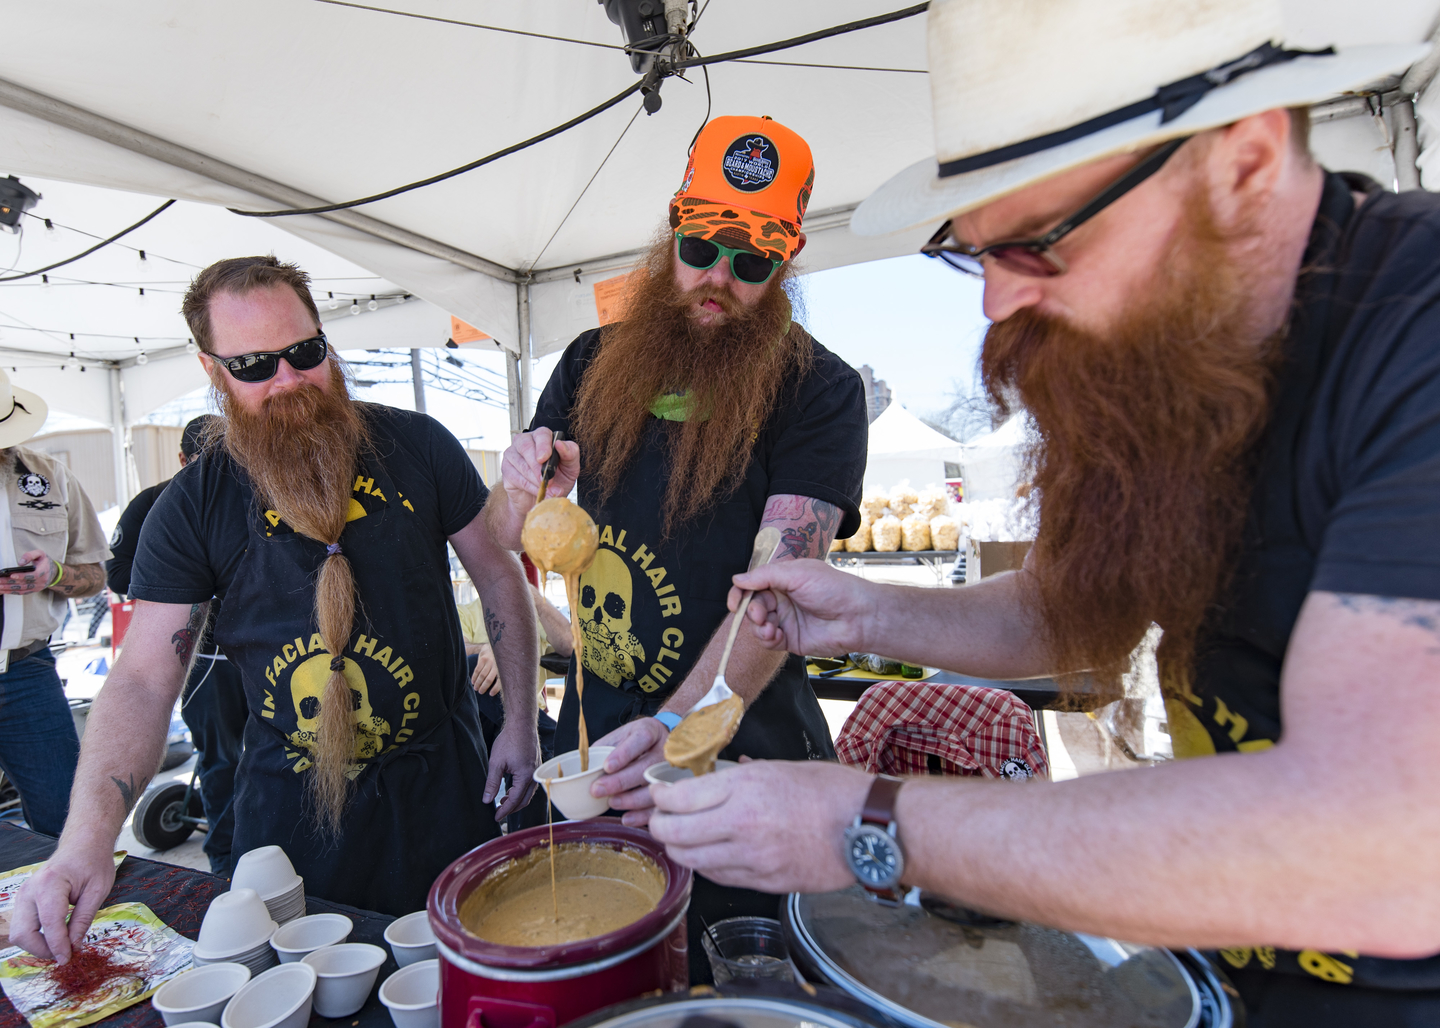 The Austin Facial Hair Club competed in the Washington State Wine presents Quesoff, a Hot Luck pop-up, at the SouthBites Trailer Park.